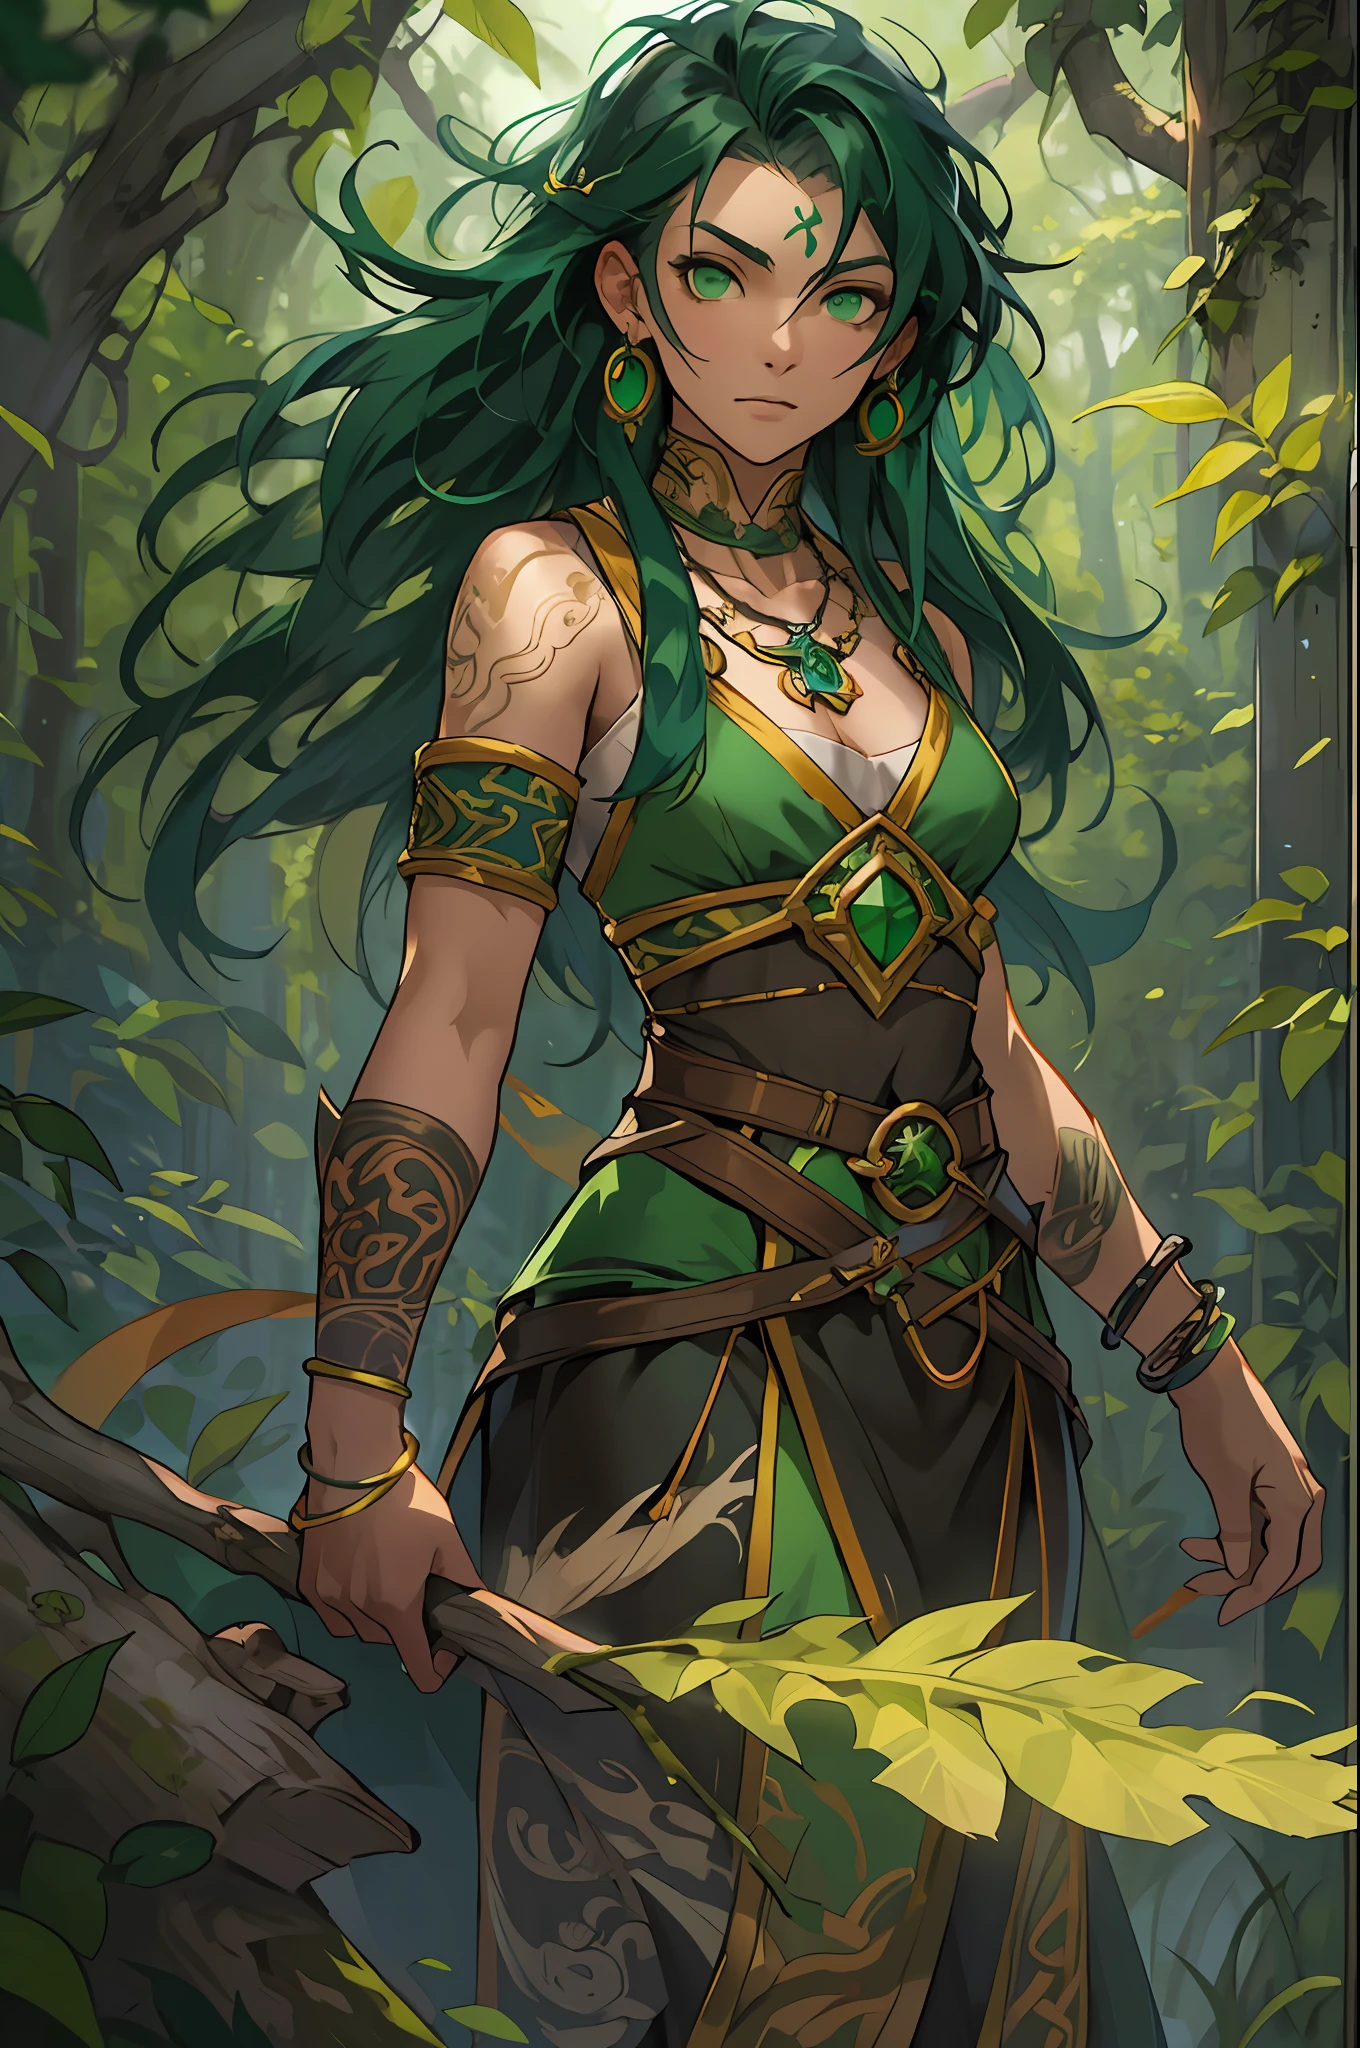 （1 Northern Girl），Anatomically correct, Solo, shaman, Nature, Healer, Round ears, wild hairs, Dark black hair, Unkempt hair, celtic tattoos, green energy, green magic, pretty eyes, Long bead necklace, Bead bracelet, trinkets, Vines in hair, Thick body, Wide body,Fantasy setting, Outdoor activities in a dream forest, Ancient ruins, Faye Wong Wilder, fey, falling leaf, ventania, Magic the Gathering, dungeons and dragons, character concept, character art, Character portrait, Cartoon, Best quality, Best resolution, 4K, Vivid colors, Vivid, High detail, best detail, confident pose, extrovert, look from down, Serious expression